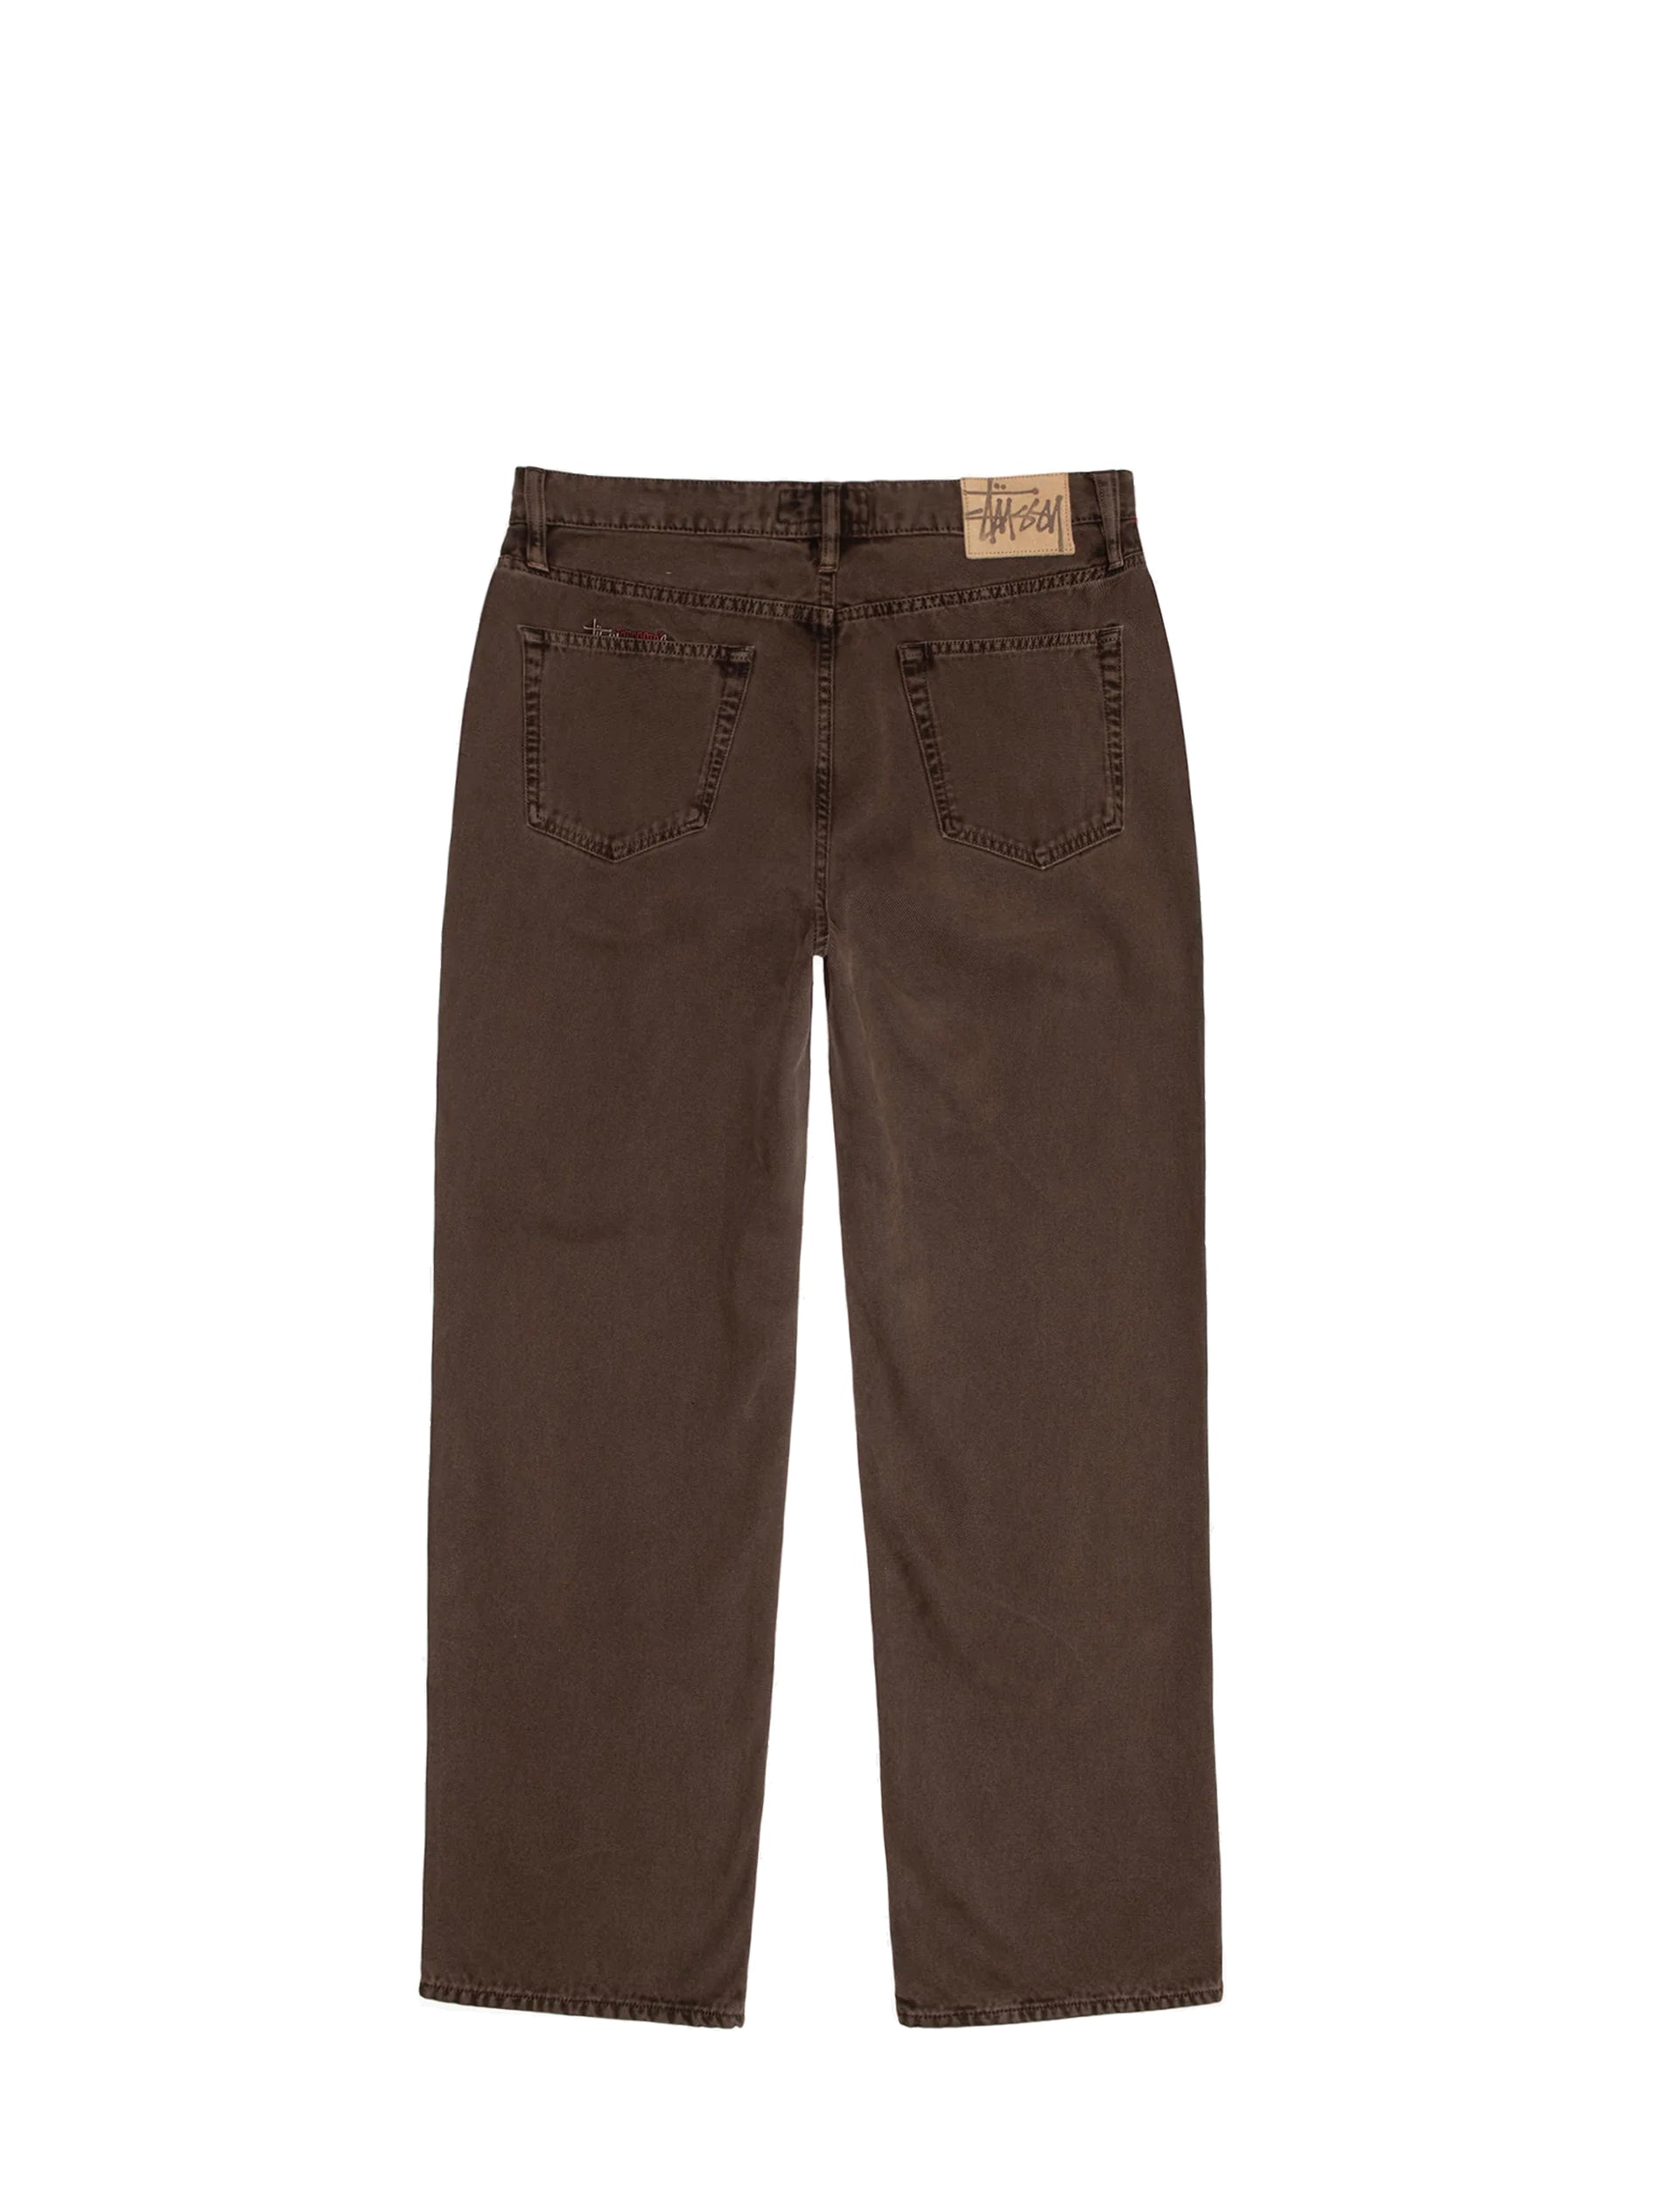 STÜSSY Classic Jeans Washed Canvas BROWN